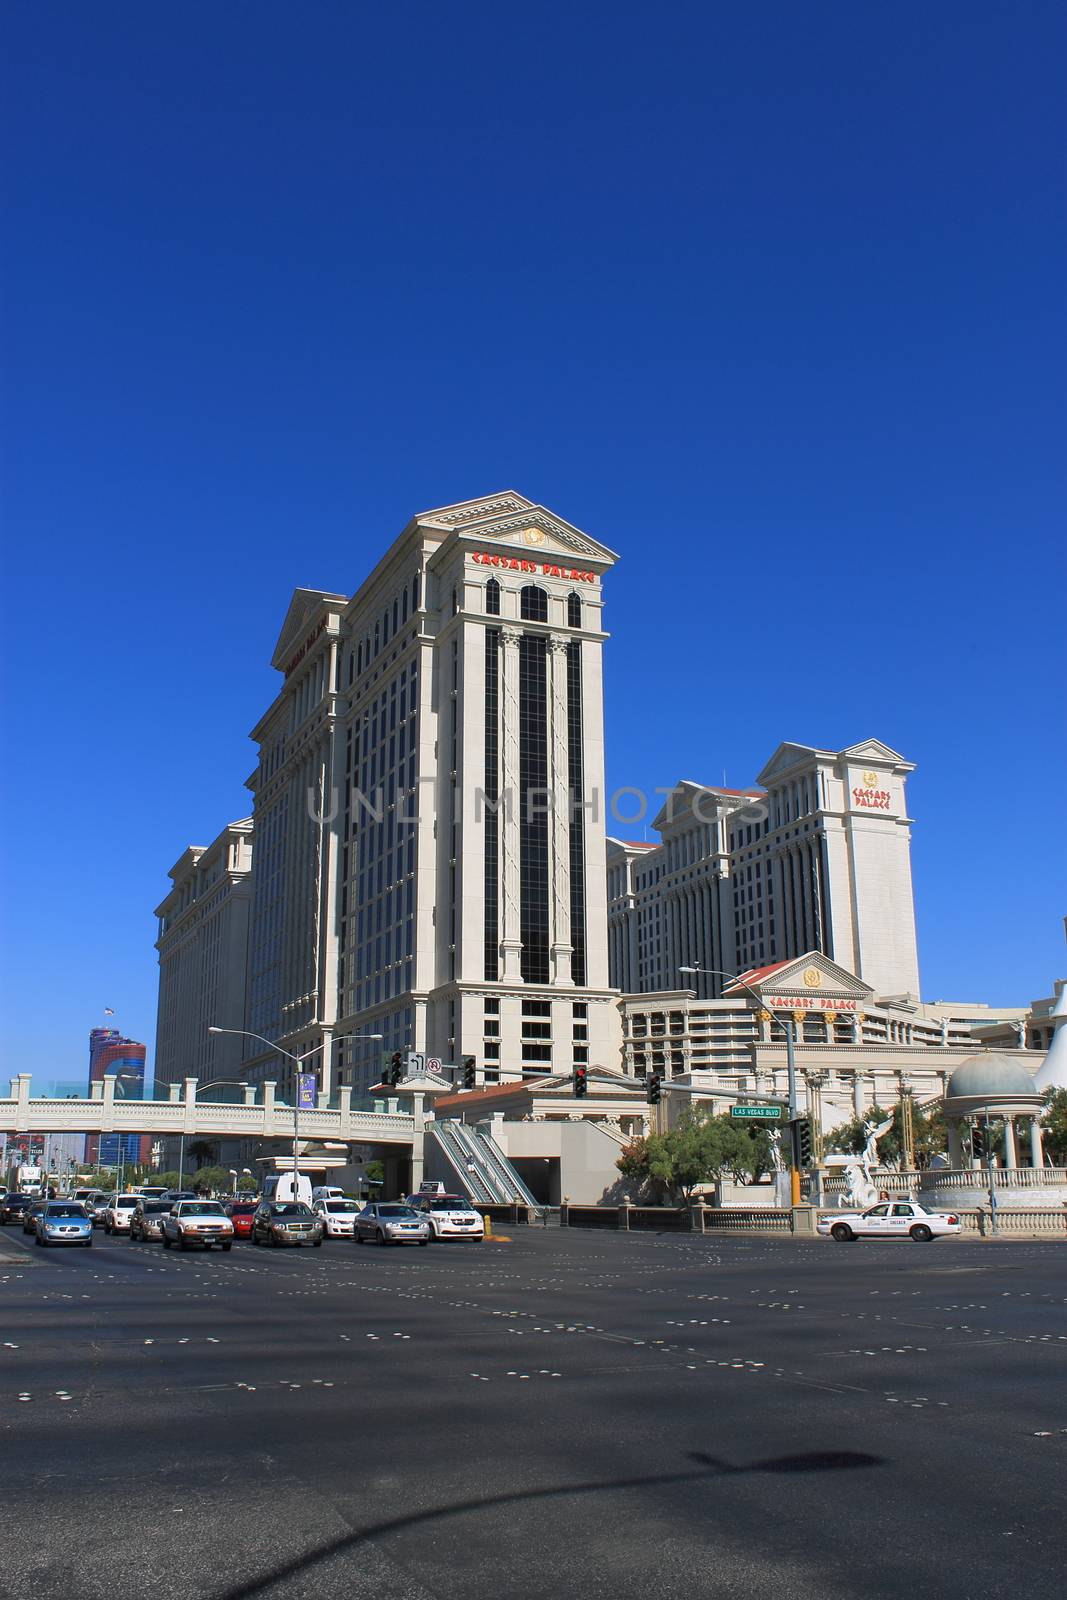 Caesars Palace Hotel and Casino on the famous Strip in Las Vegas.